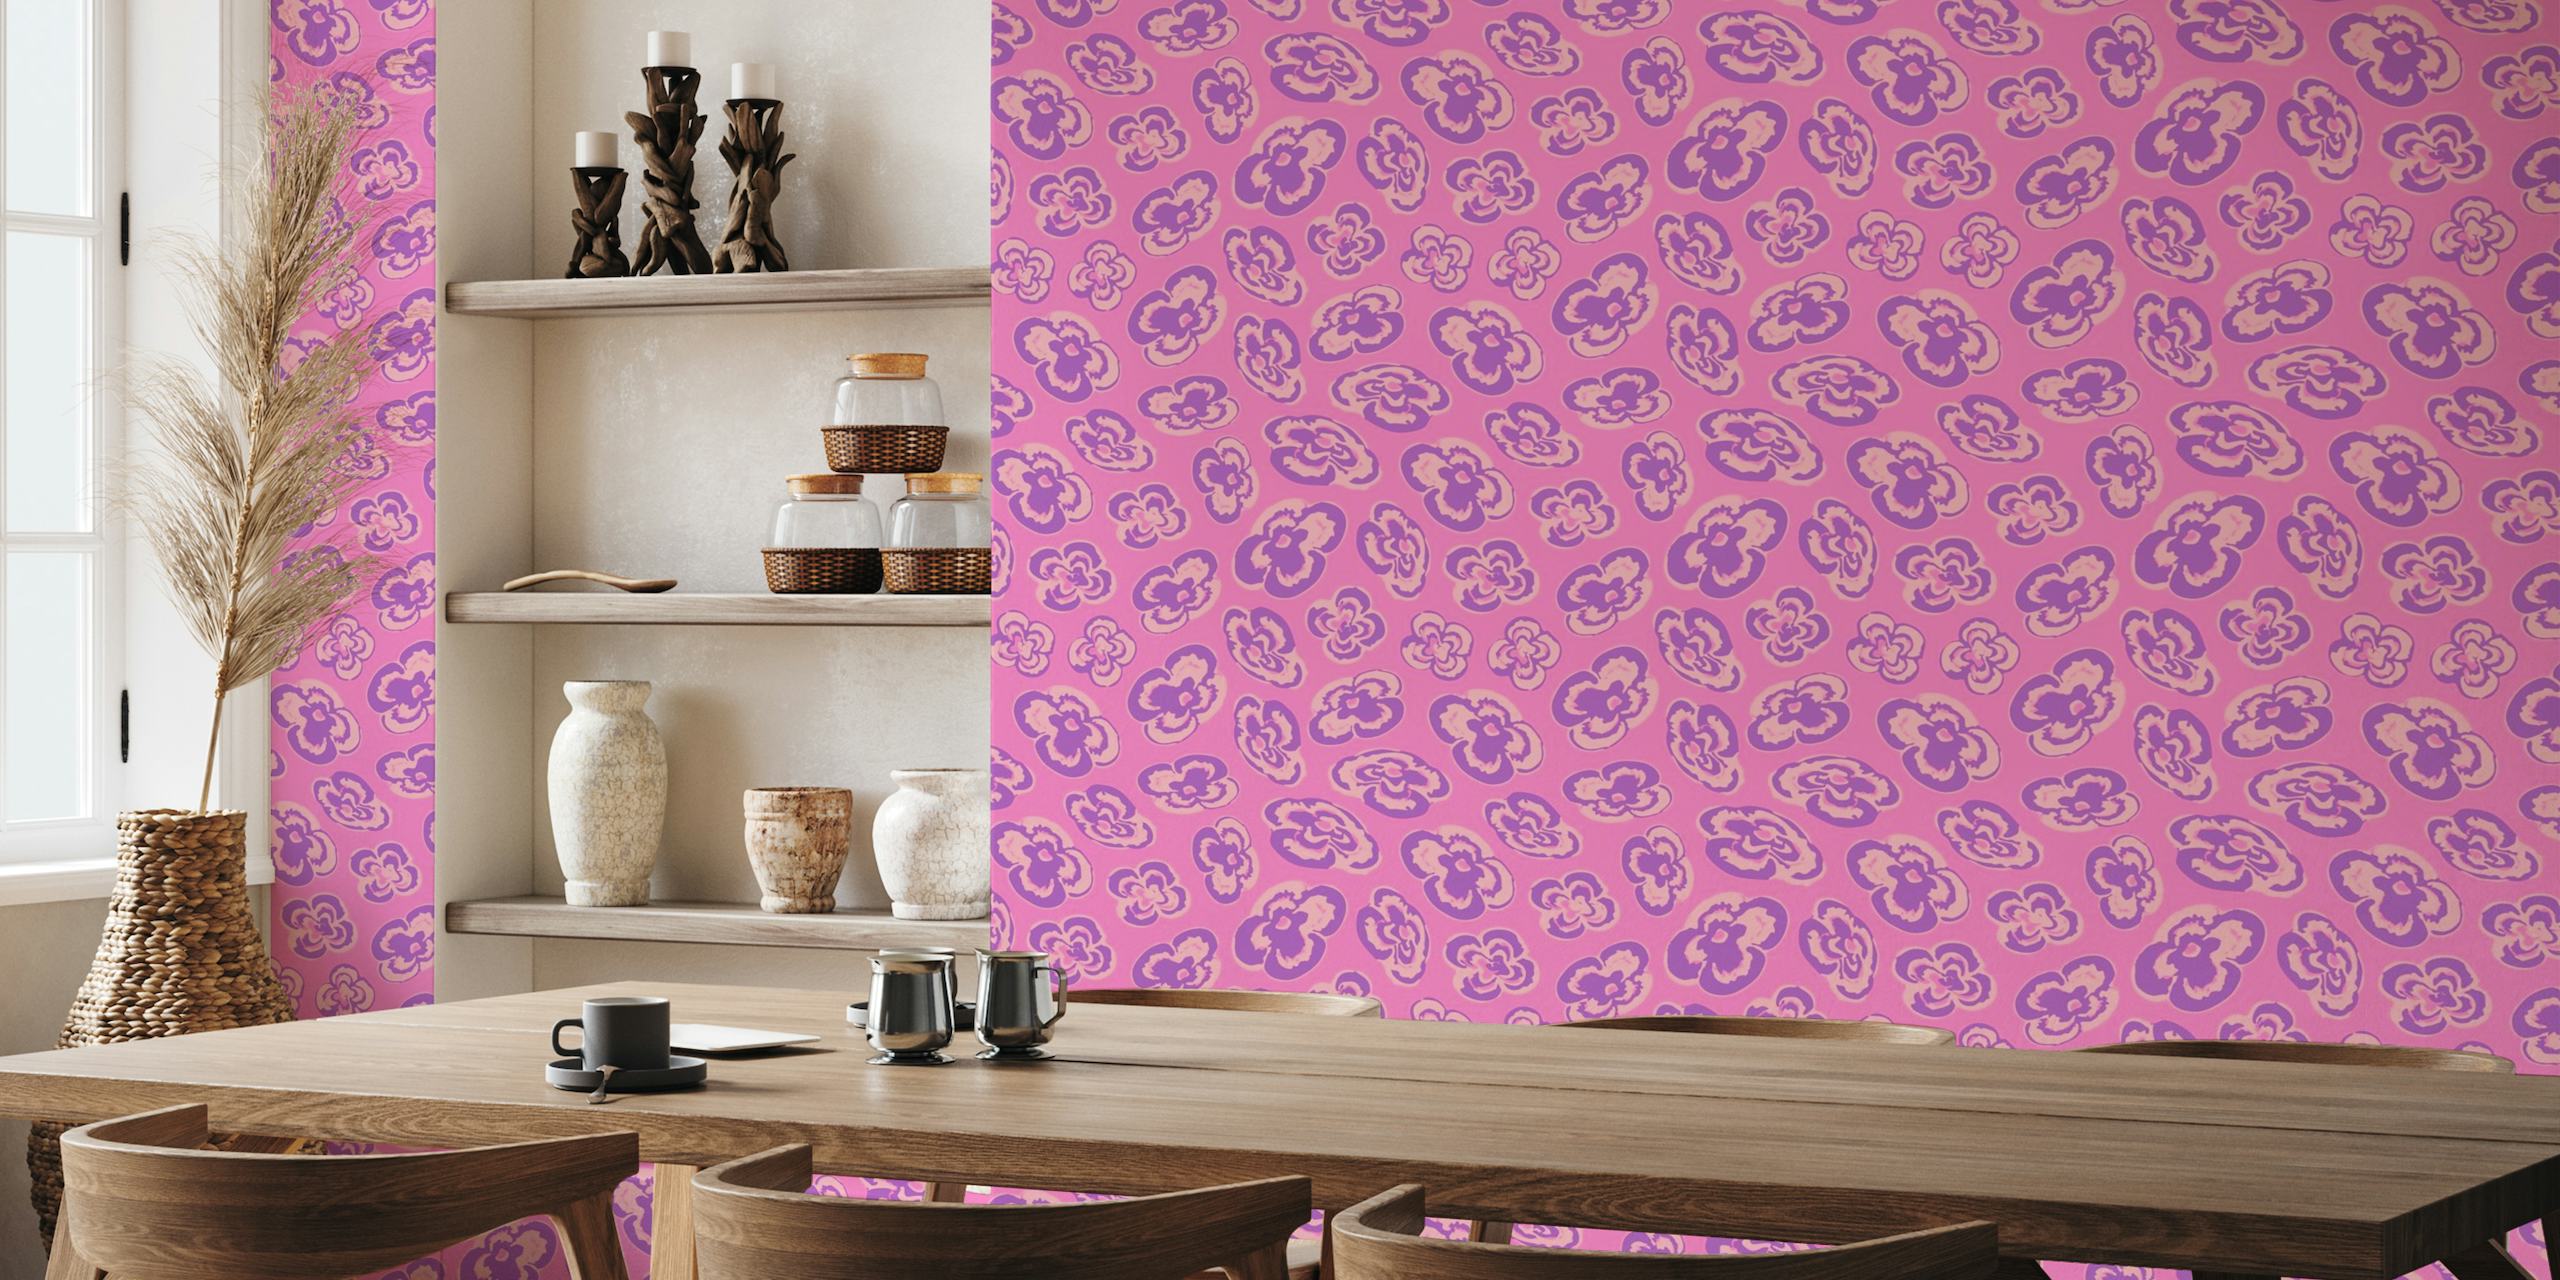 FLOATING LILIES Abstract Floral - Purple Pink wallpaper